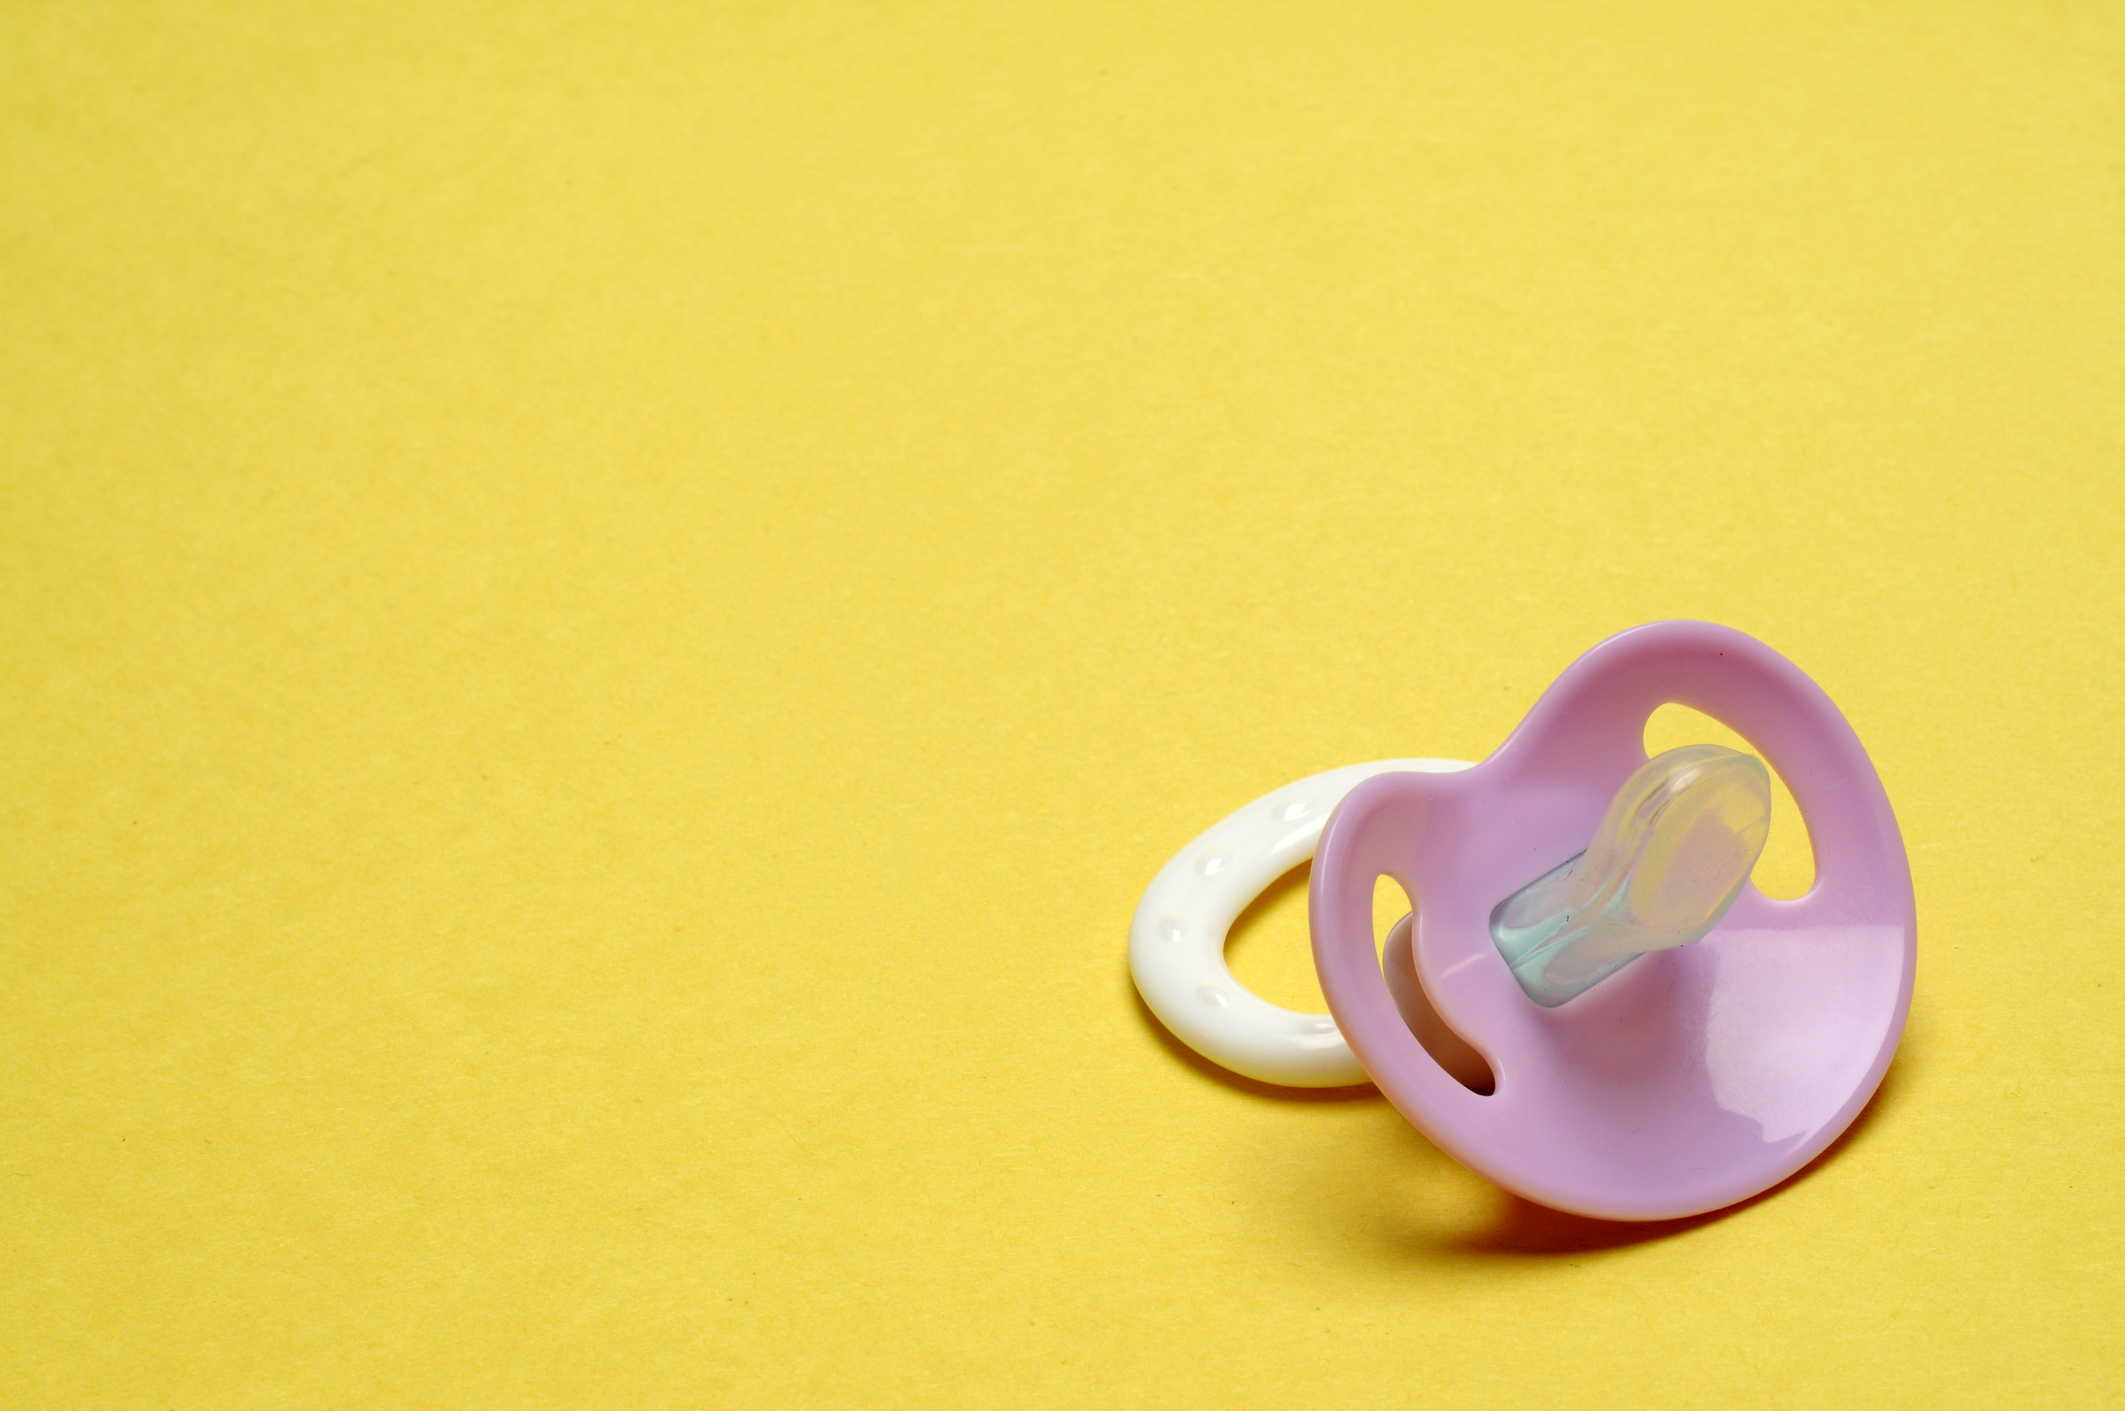 Dummy Pacifier on Yellow Background with Copy Space (Getty Images)